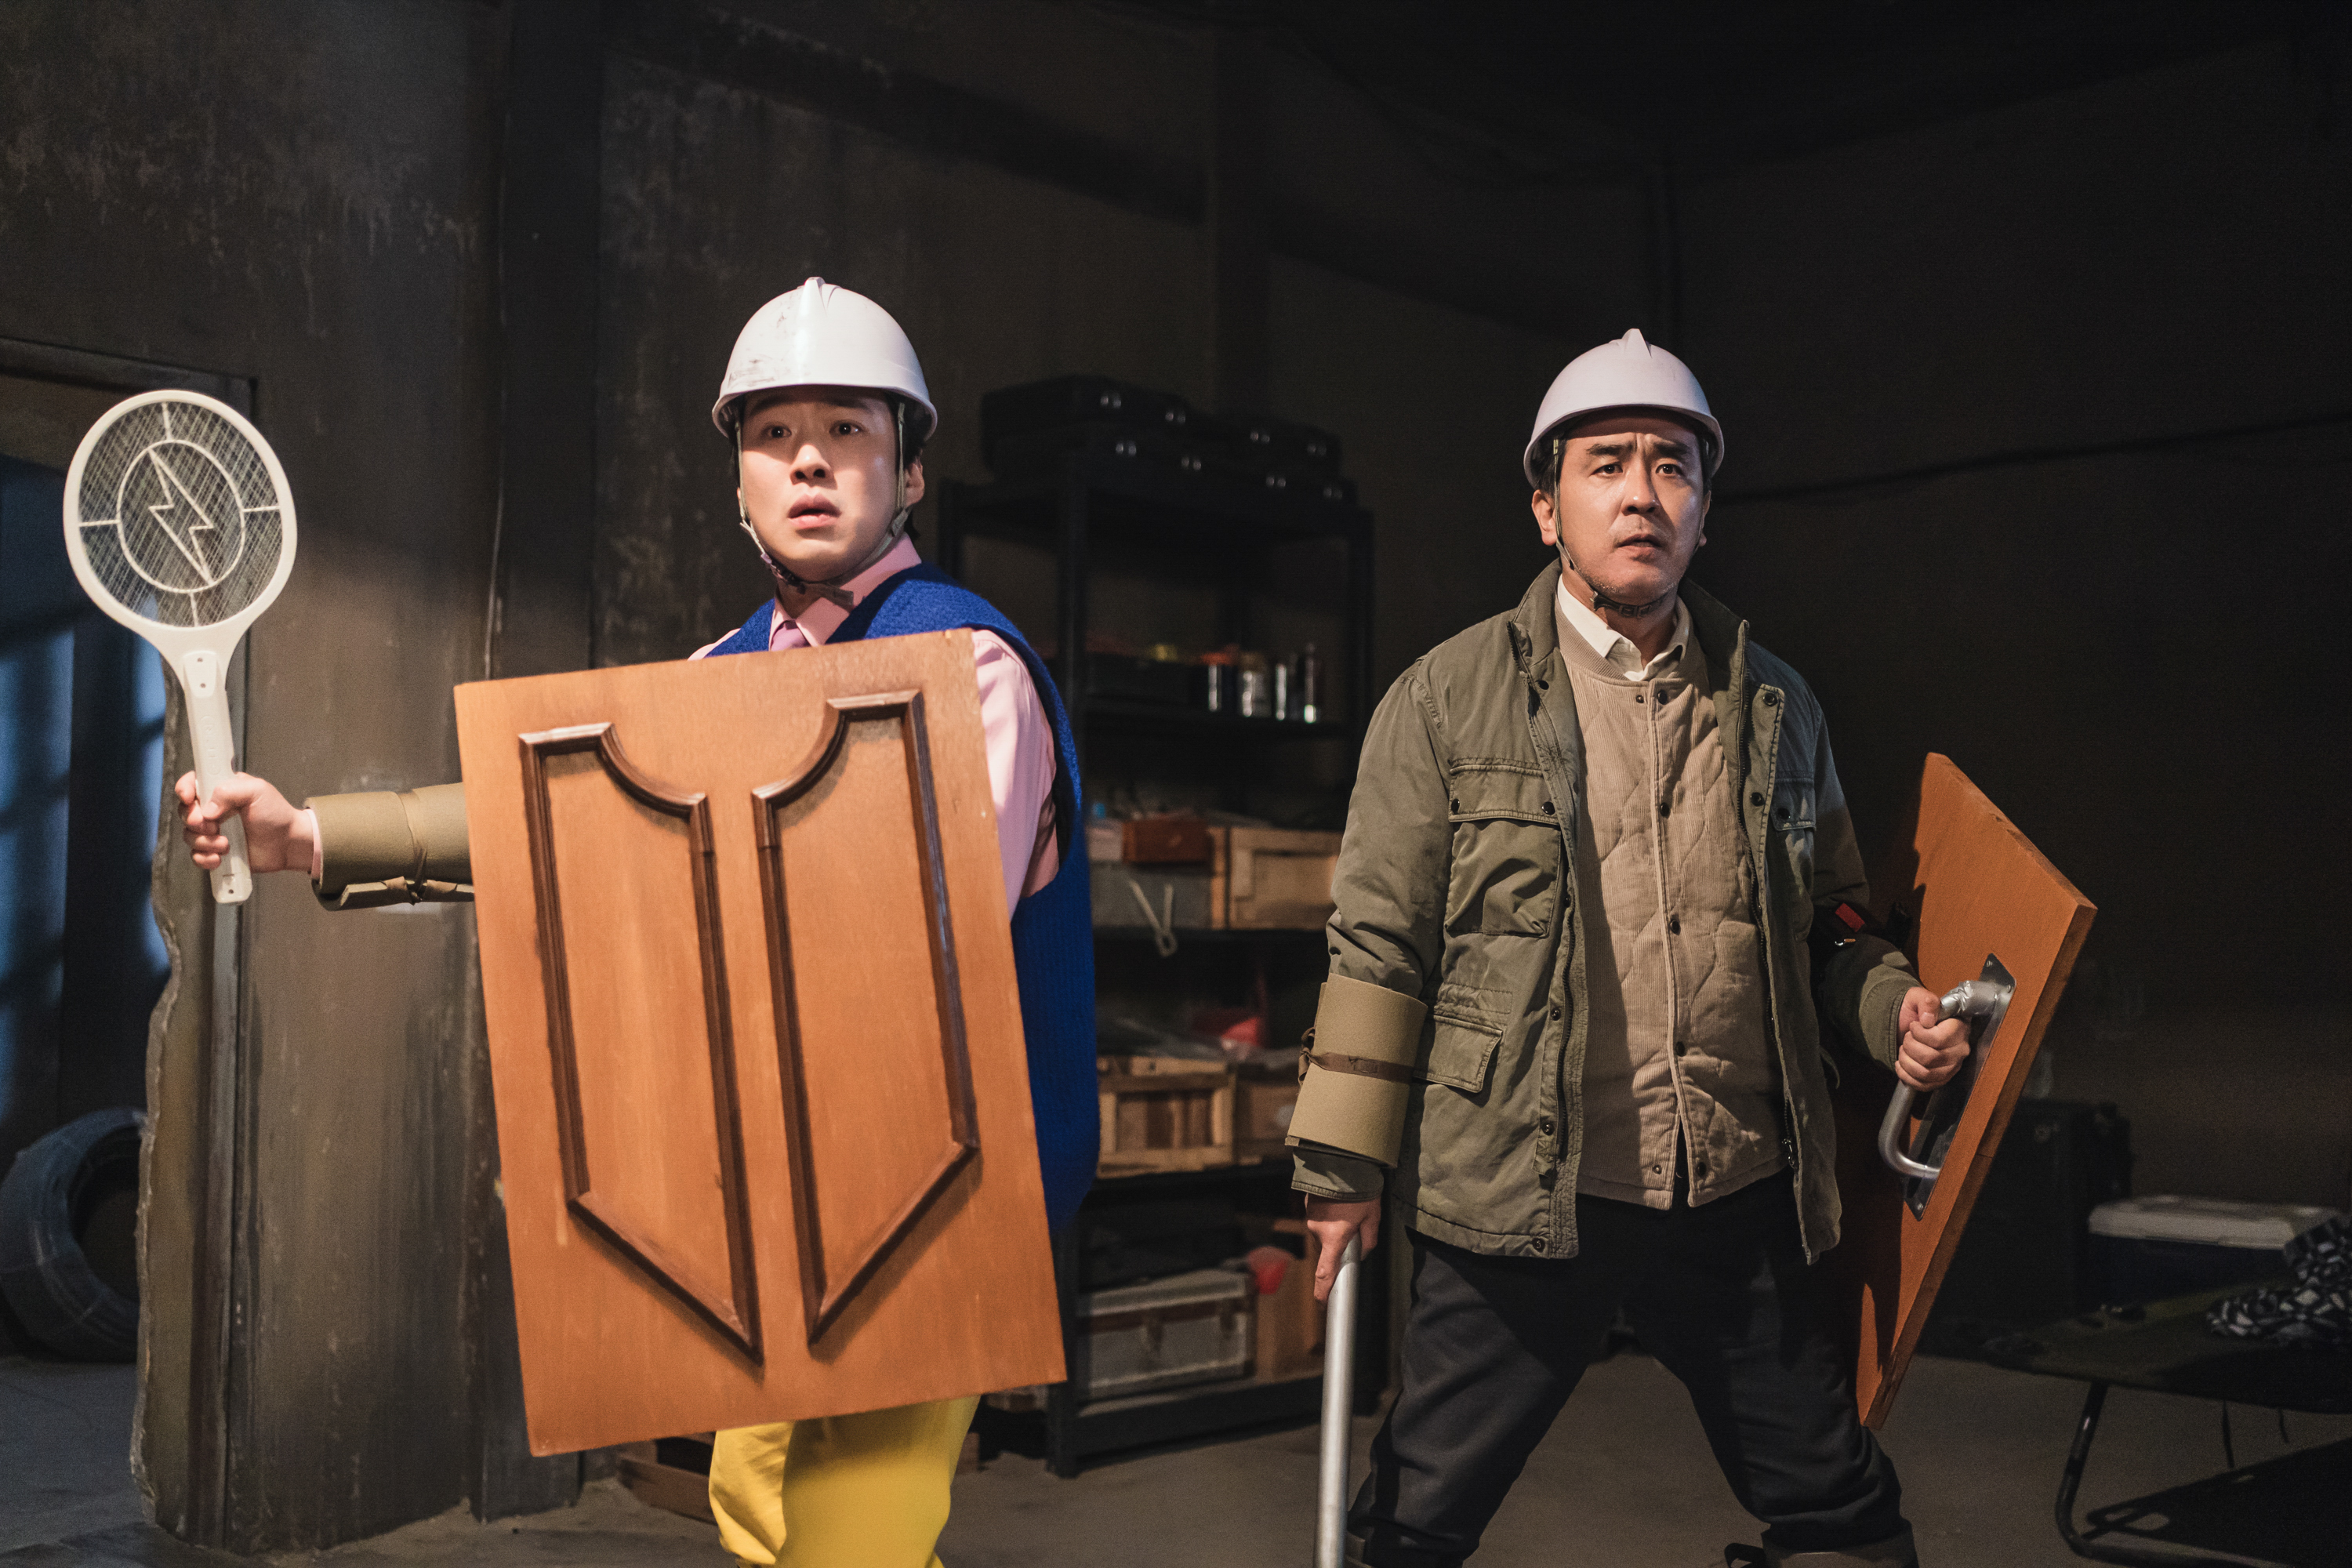 Two men look very silly in office equipment as body armor, holding racquets as weapons, in Chicken Nugget